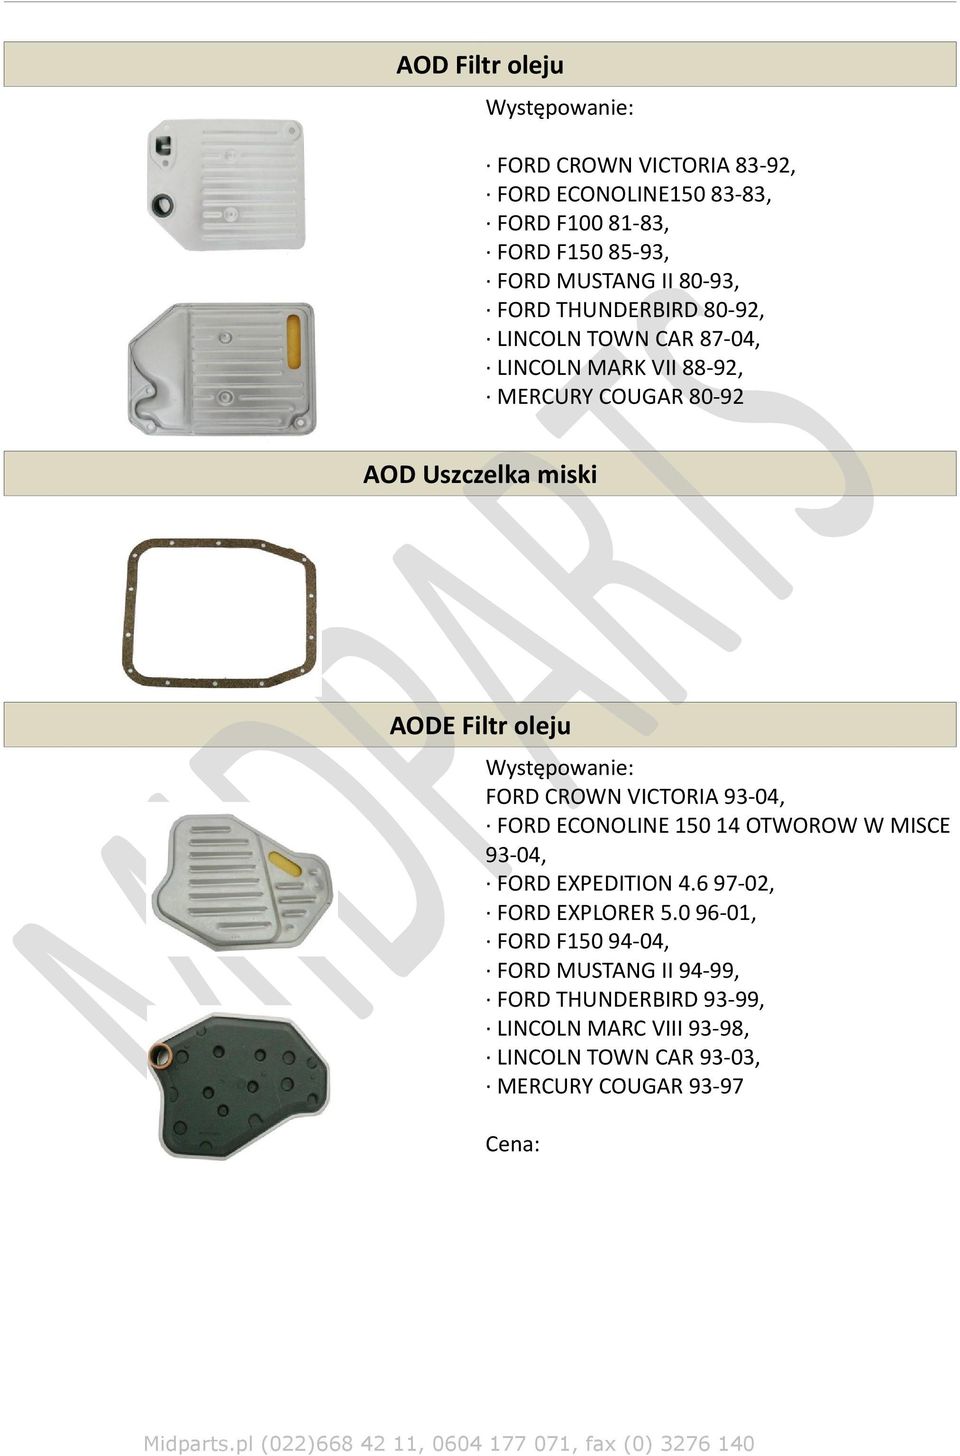 CROWN VICTORIA 93-04, FORD ECONOLINE 150 14 OTWOROW W MISCE 93-04, FORD EXPEDITION 4.6 97-02, FORD EXPLORER 5.